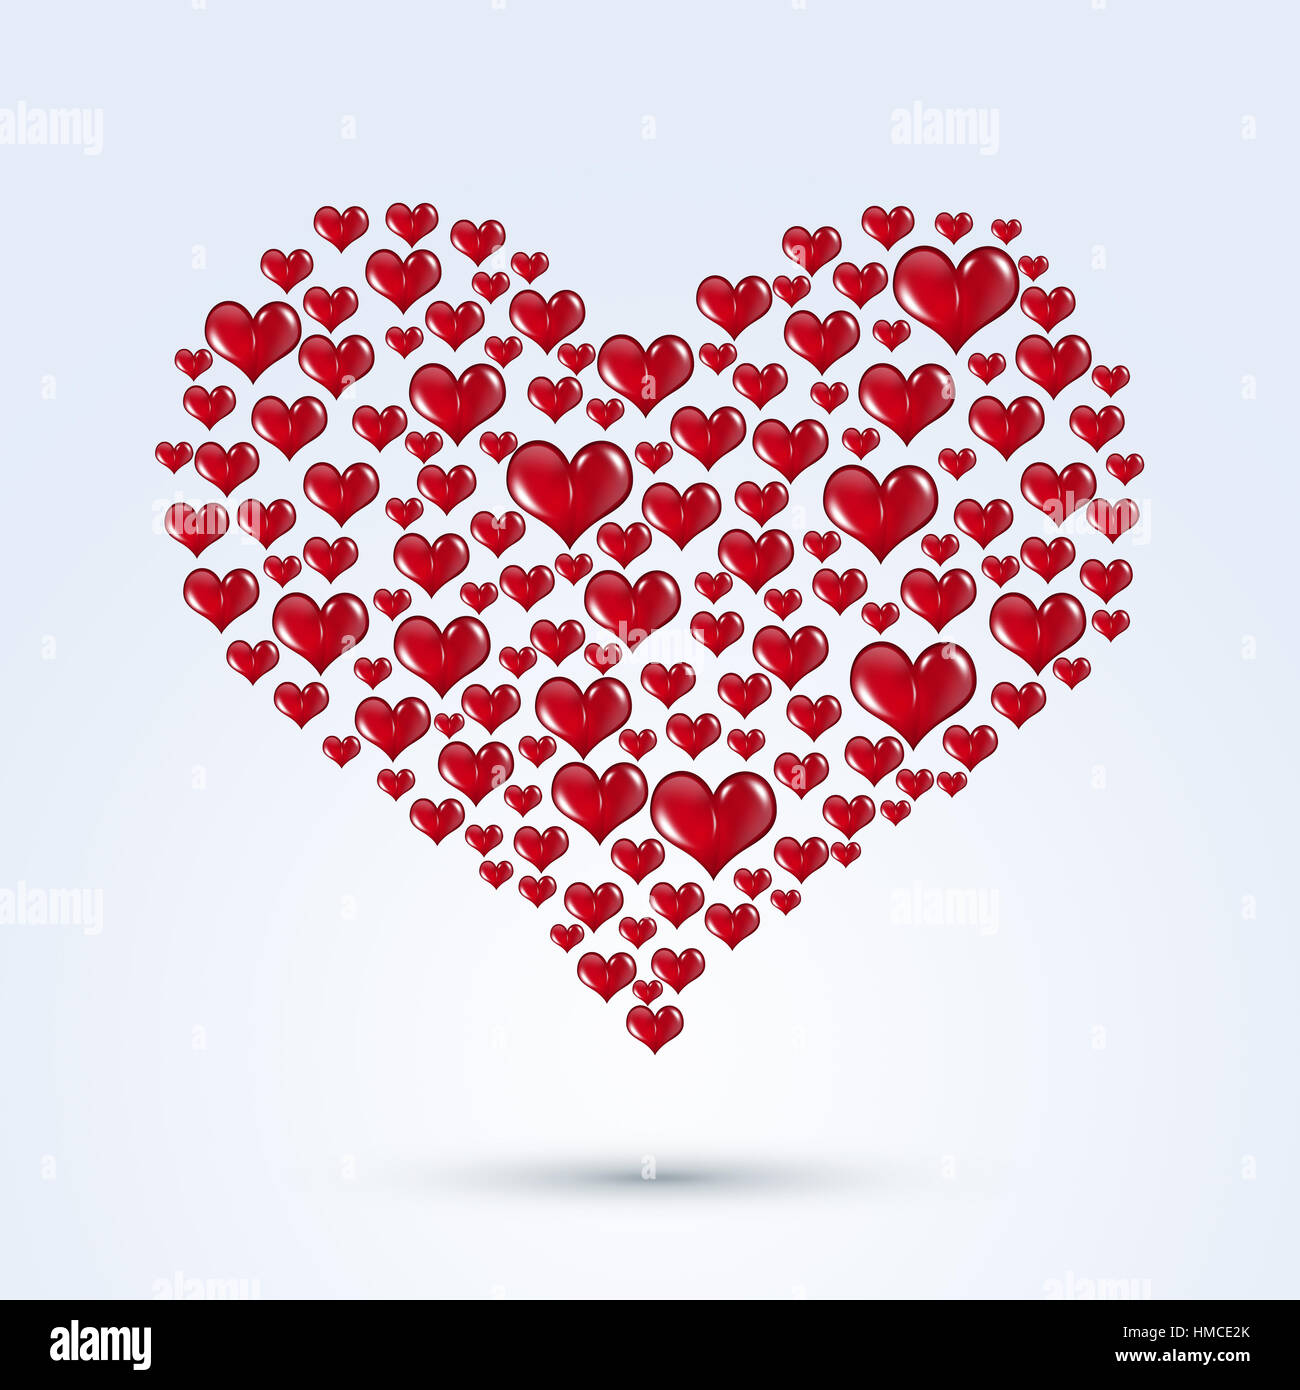 holiday valentines heart shape with red hearts Stock Photo